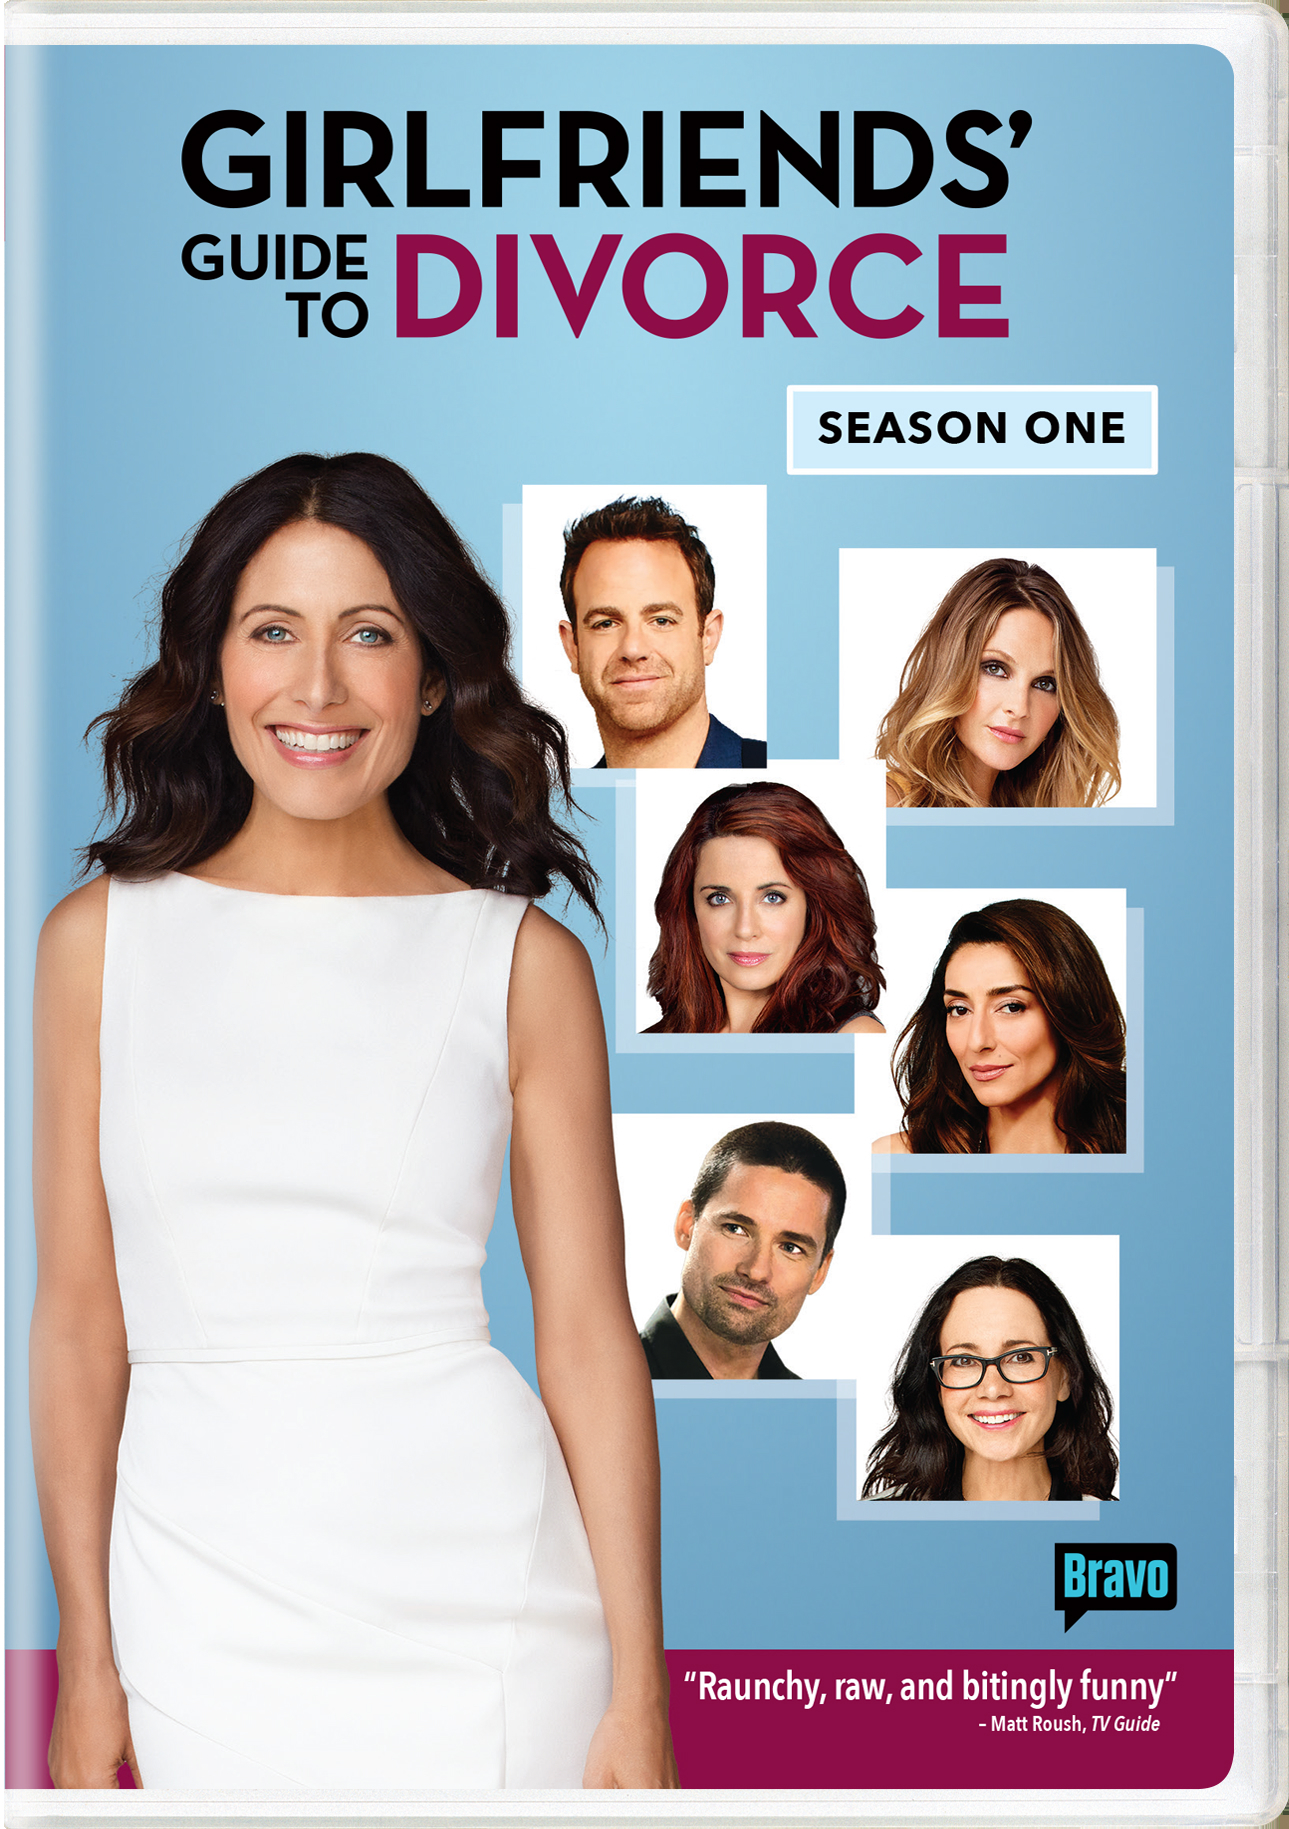 Girlfriends' Guide To Divorce: Season 1 - DVD [ 2015 ]  - Drama Television On DVD - TV Shows On GRUV